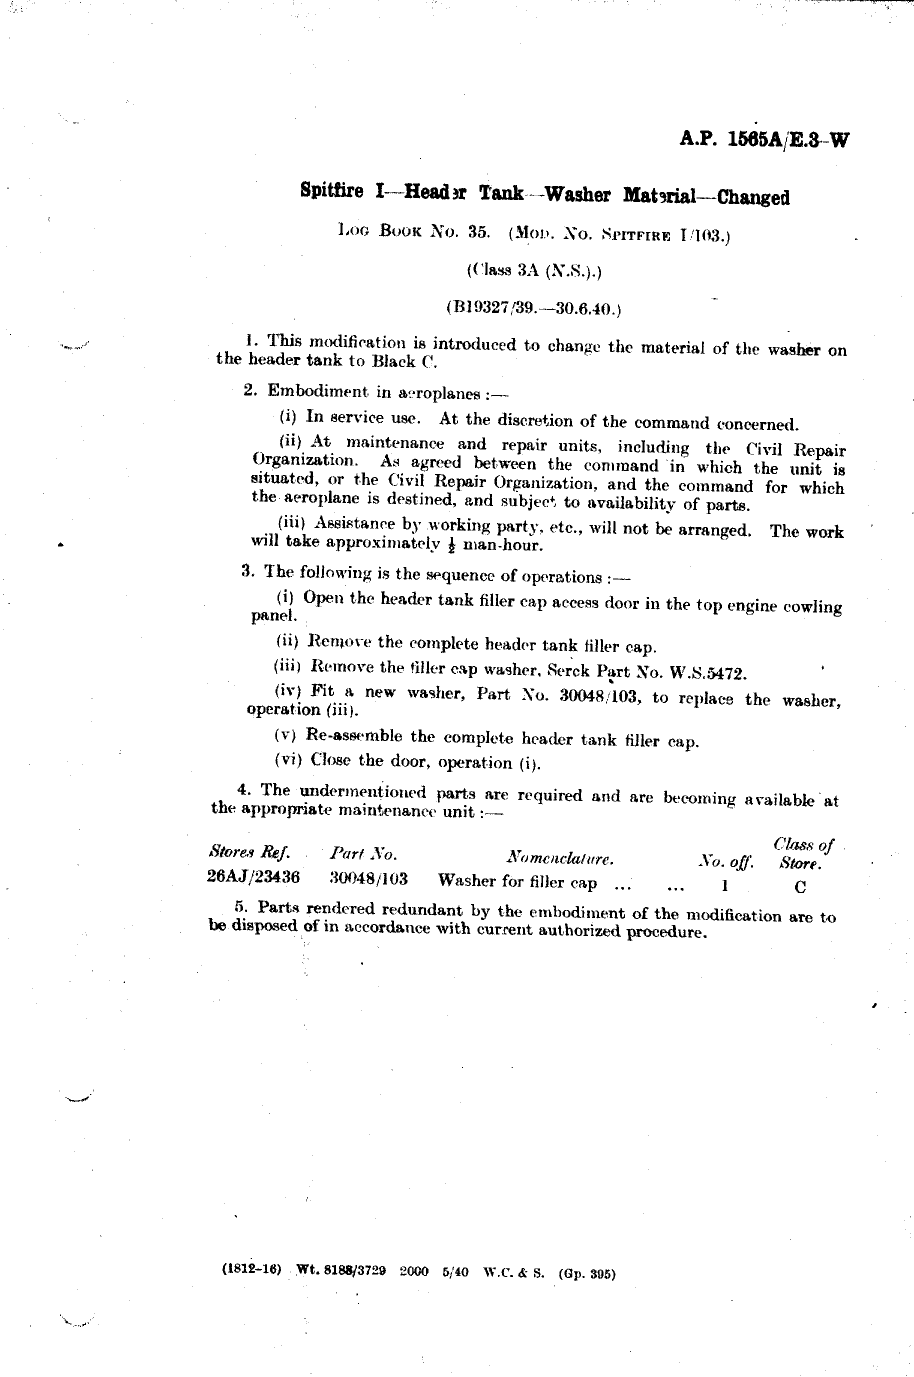 Sample page 1 from AirCorps Library document: Spitfire I Header Tank Washer Material Changed